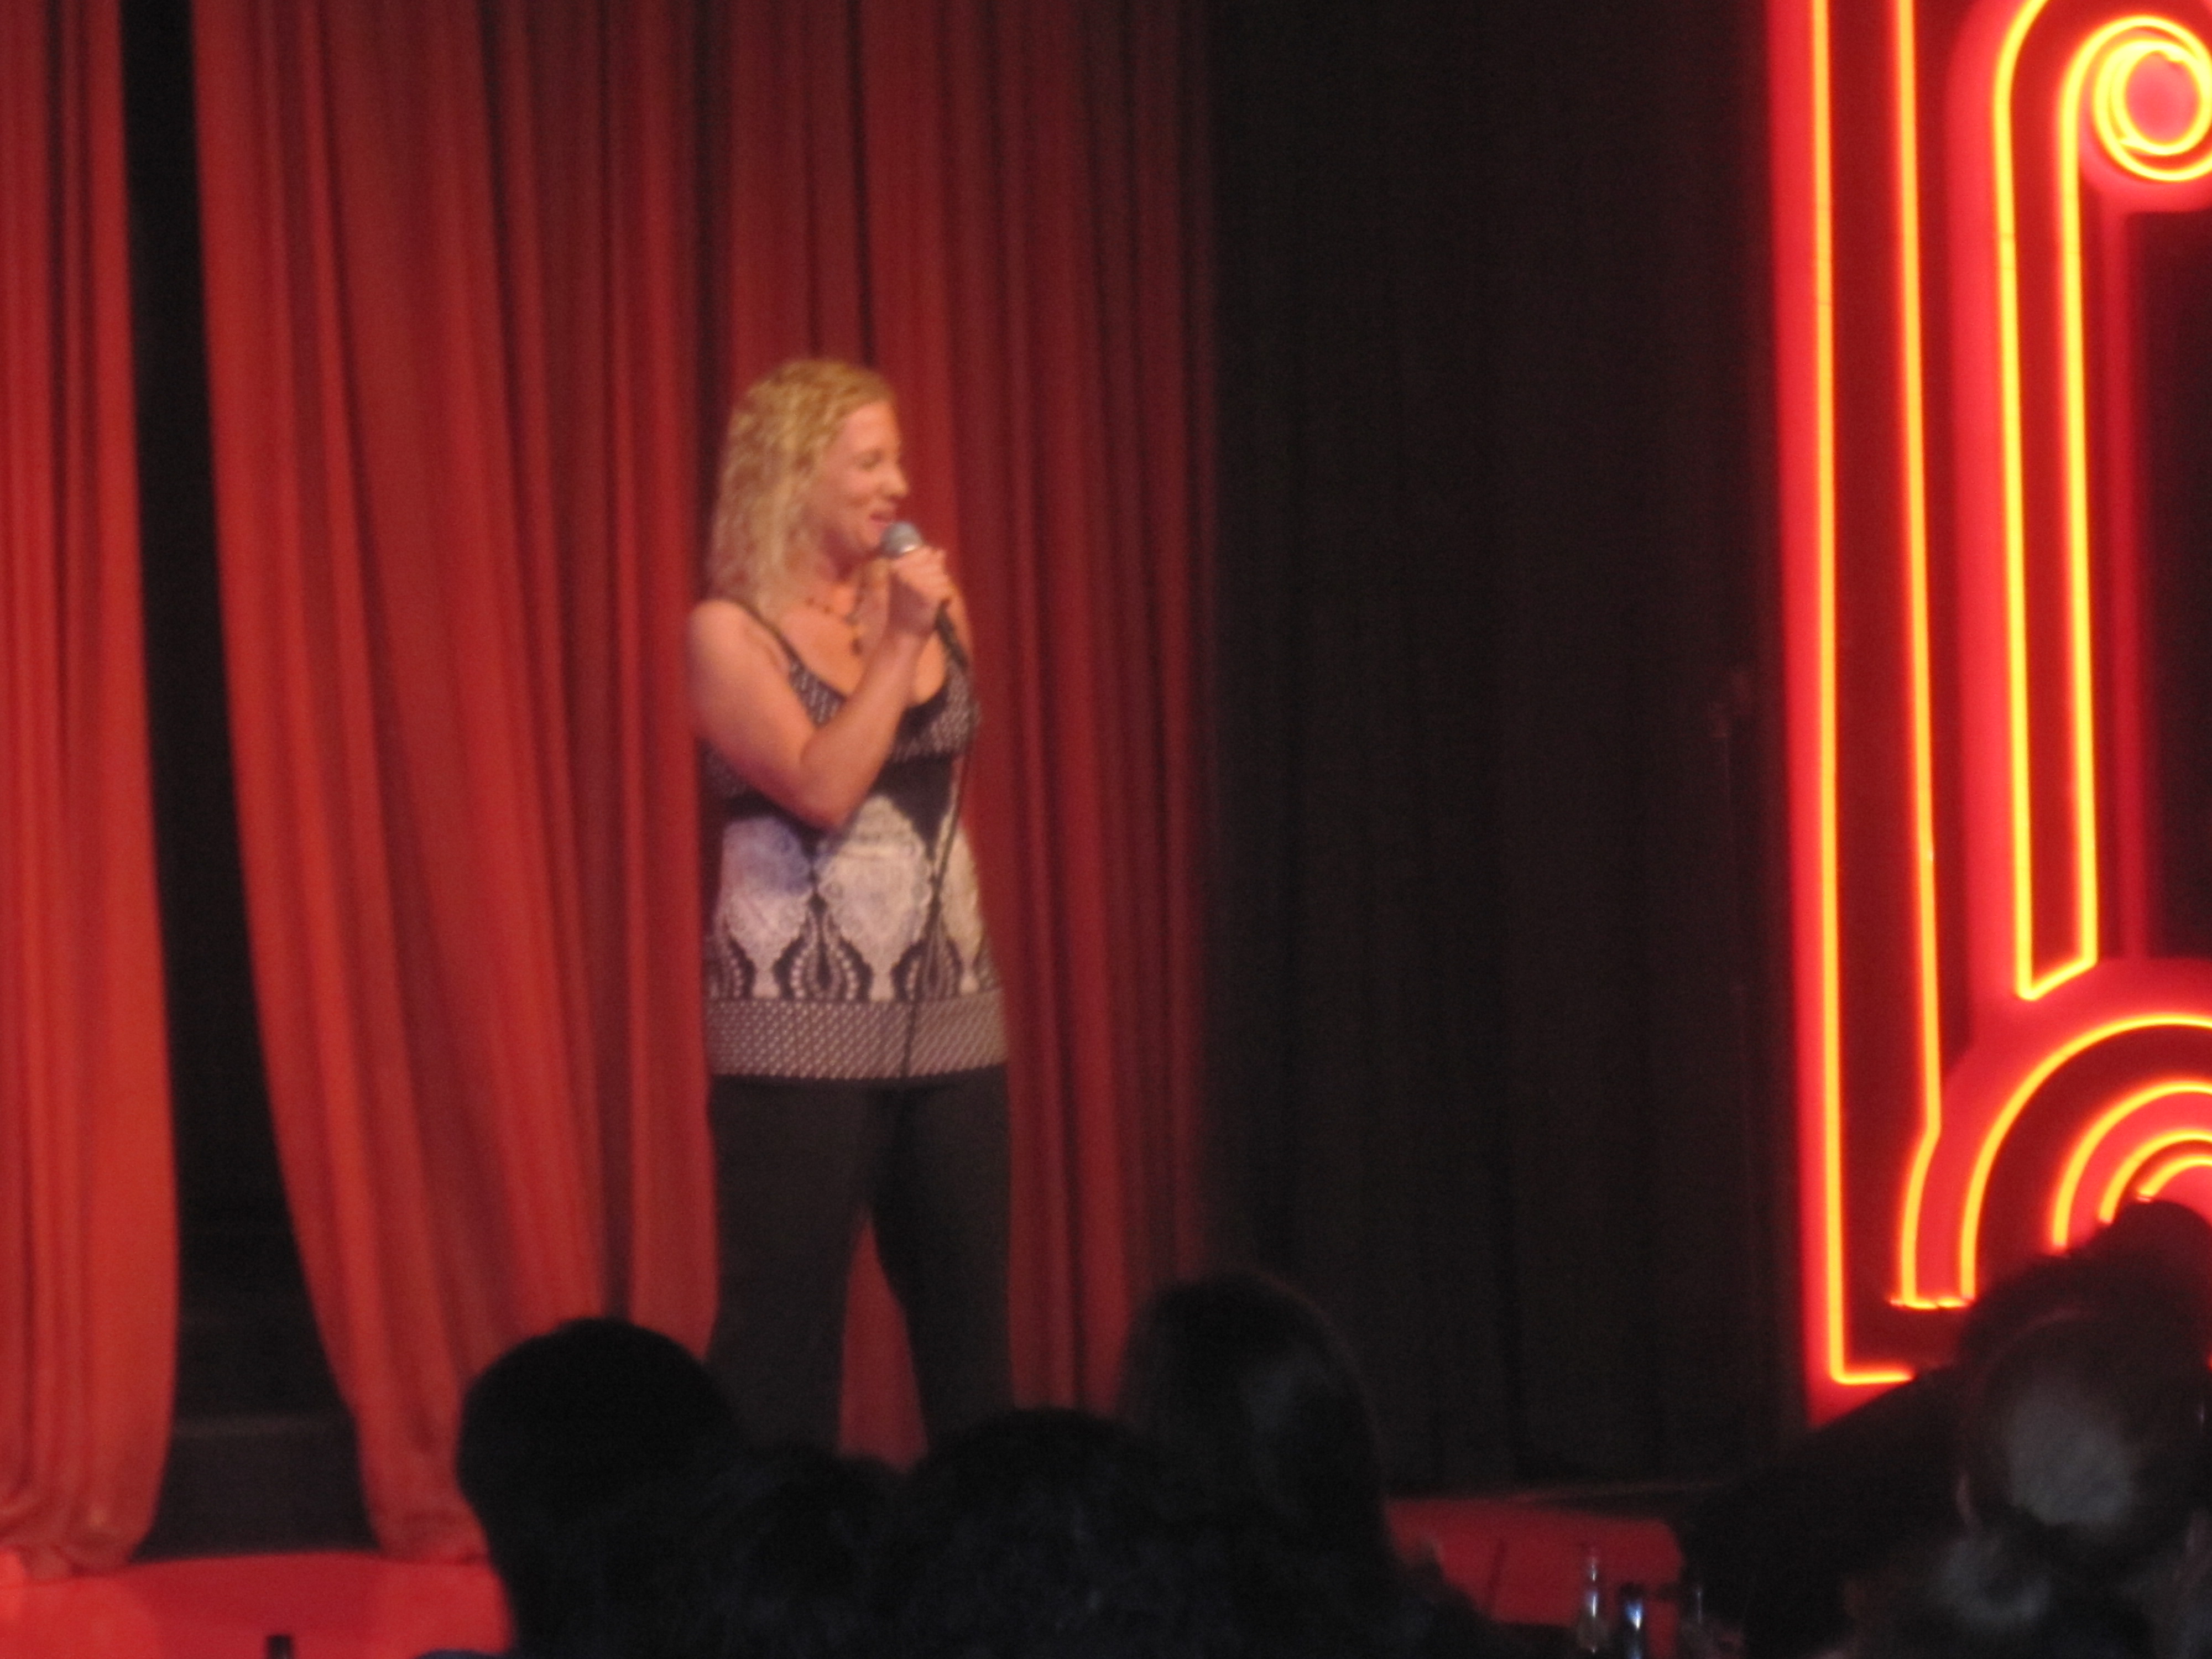 Performing in The Main Room at The Comedy Store